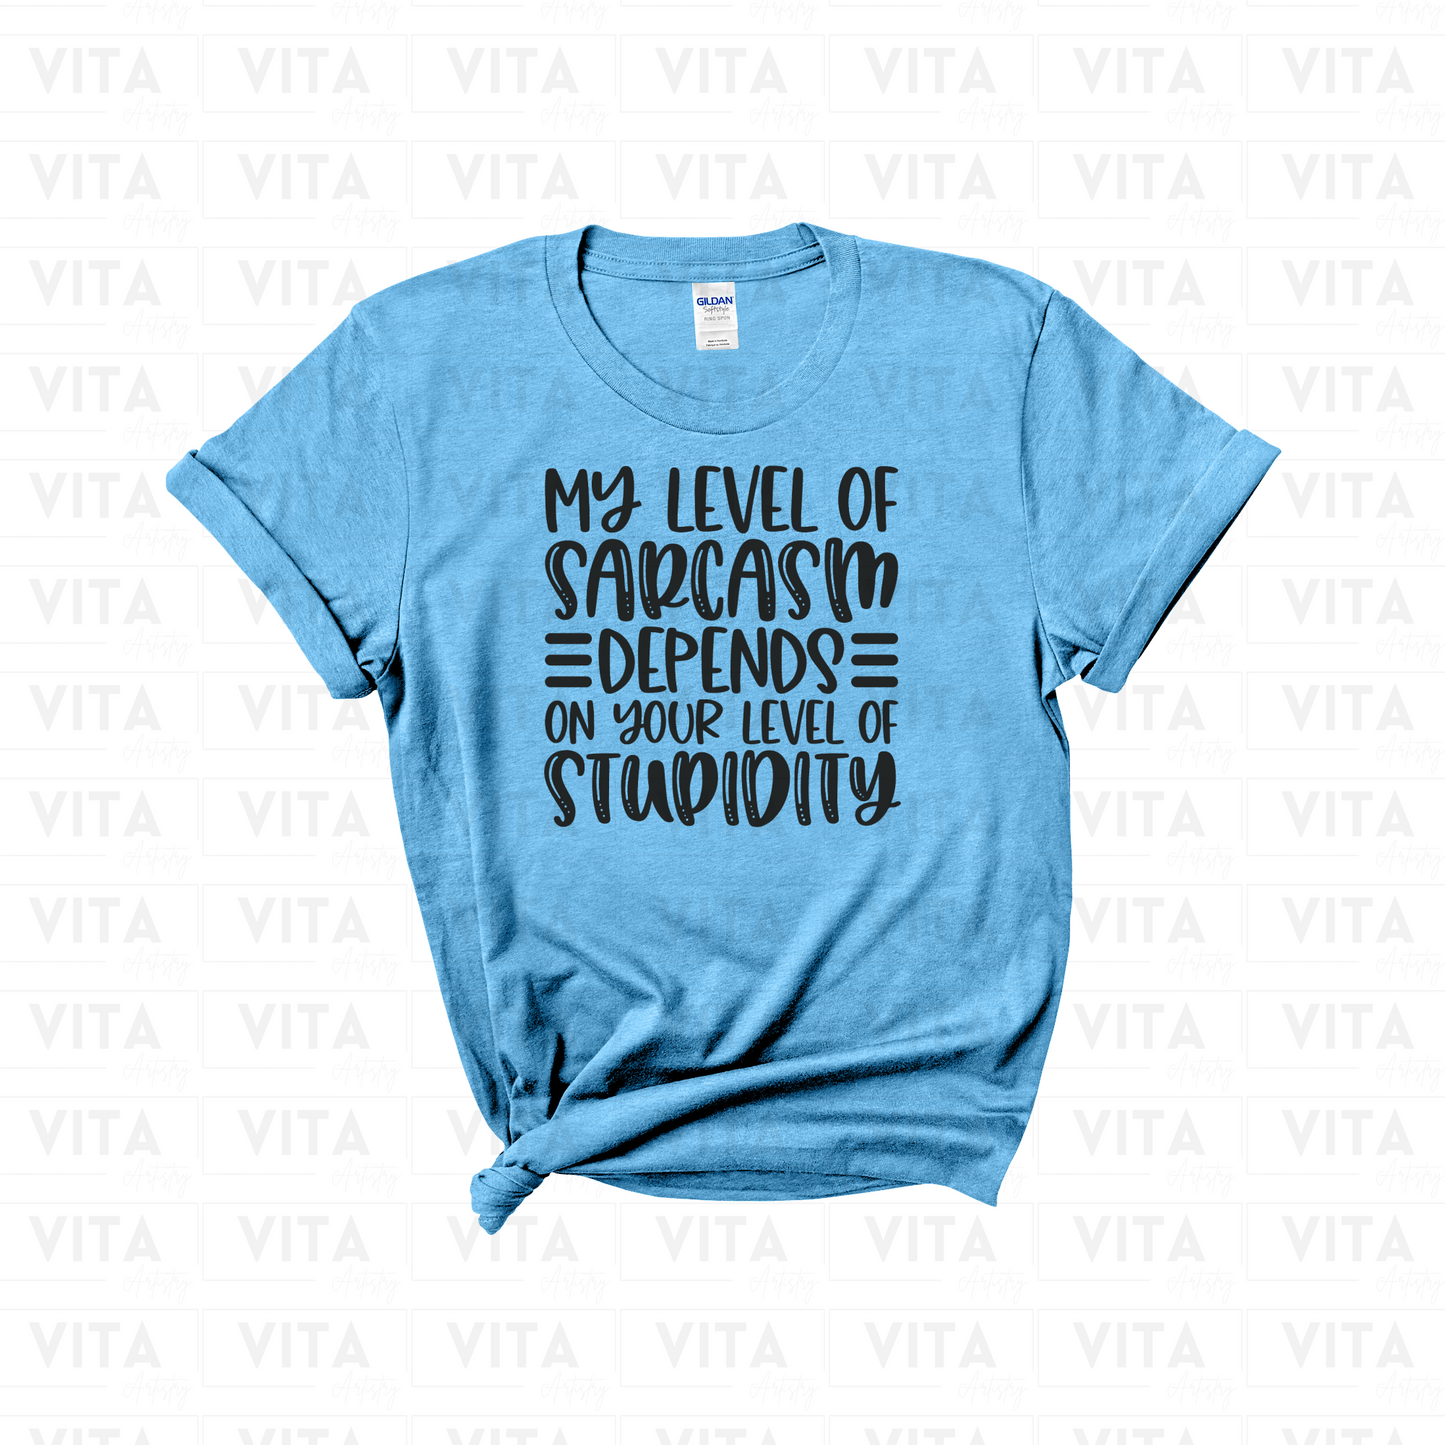 My Level of Sarcasm Depends On Your Level of Stupidity - Sarcastic Soft Style T-Shirt (Choose your shirt color)